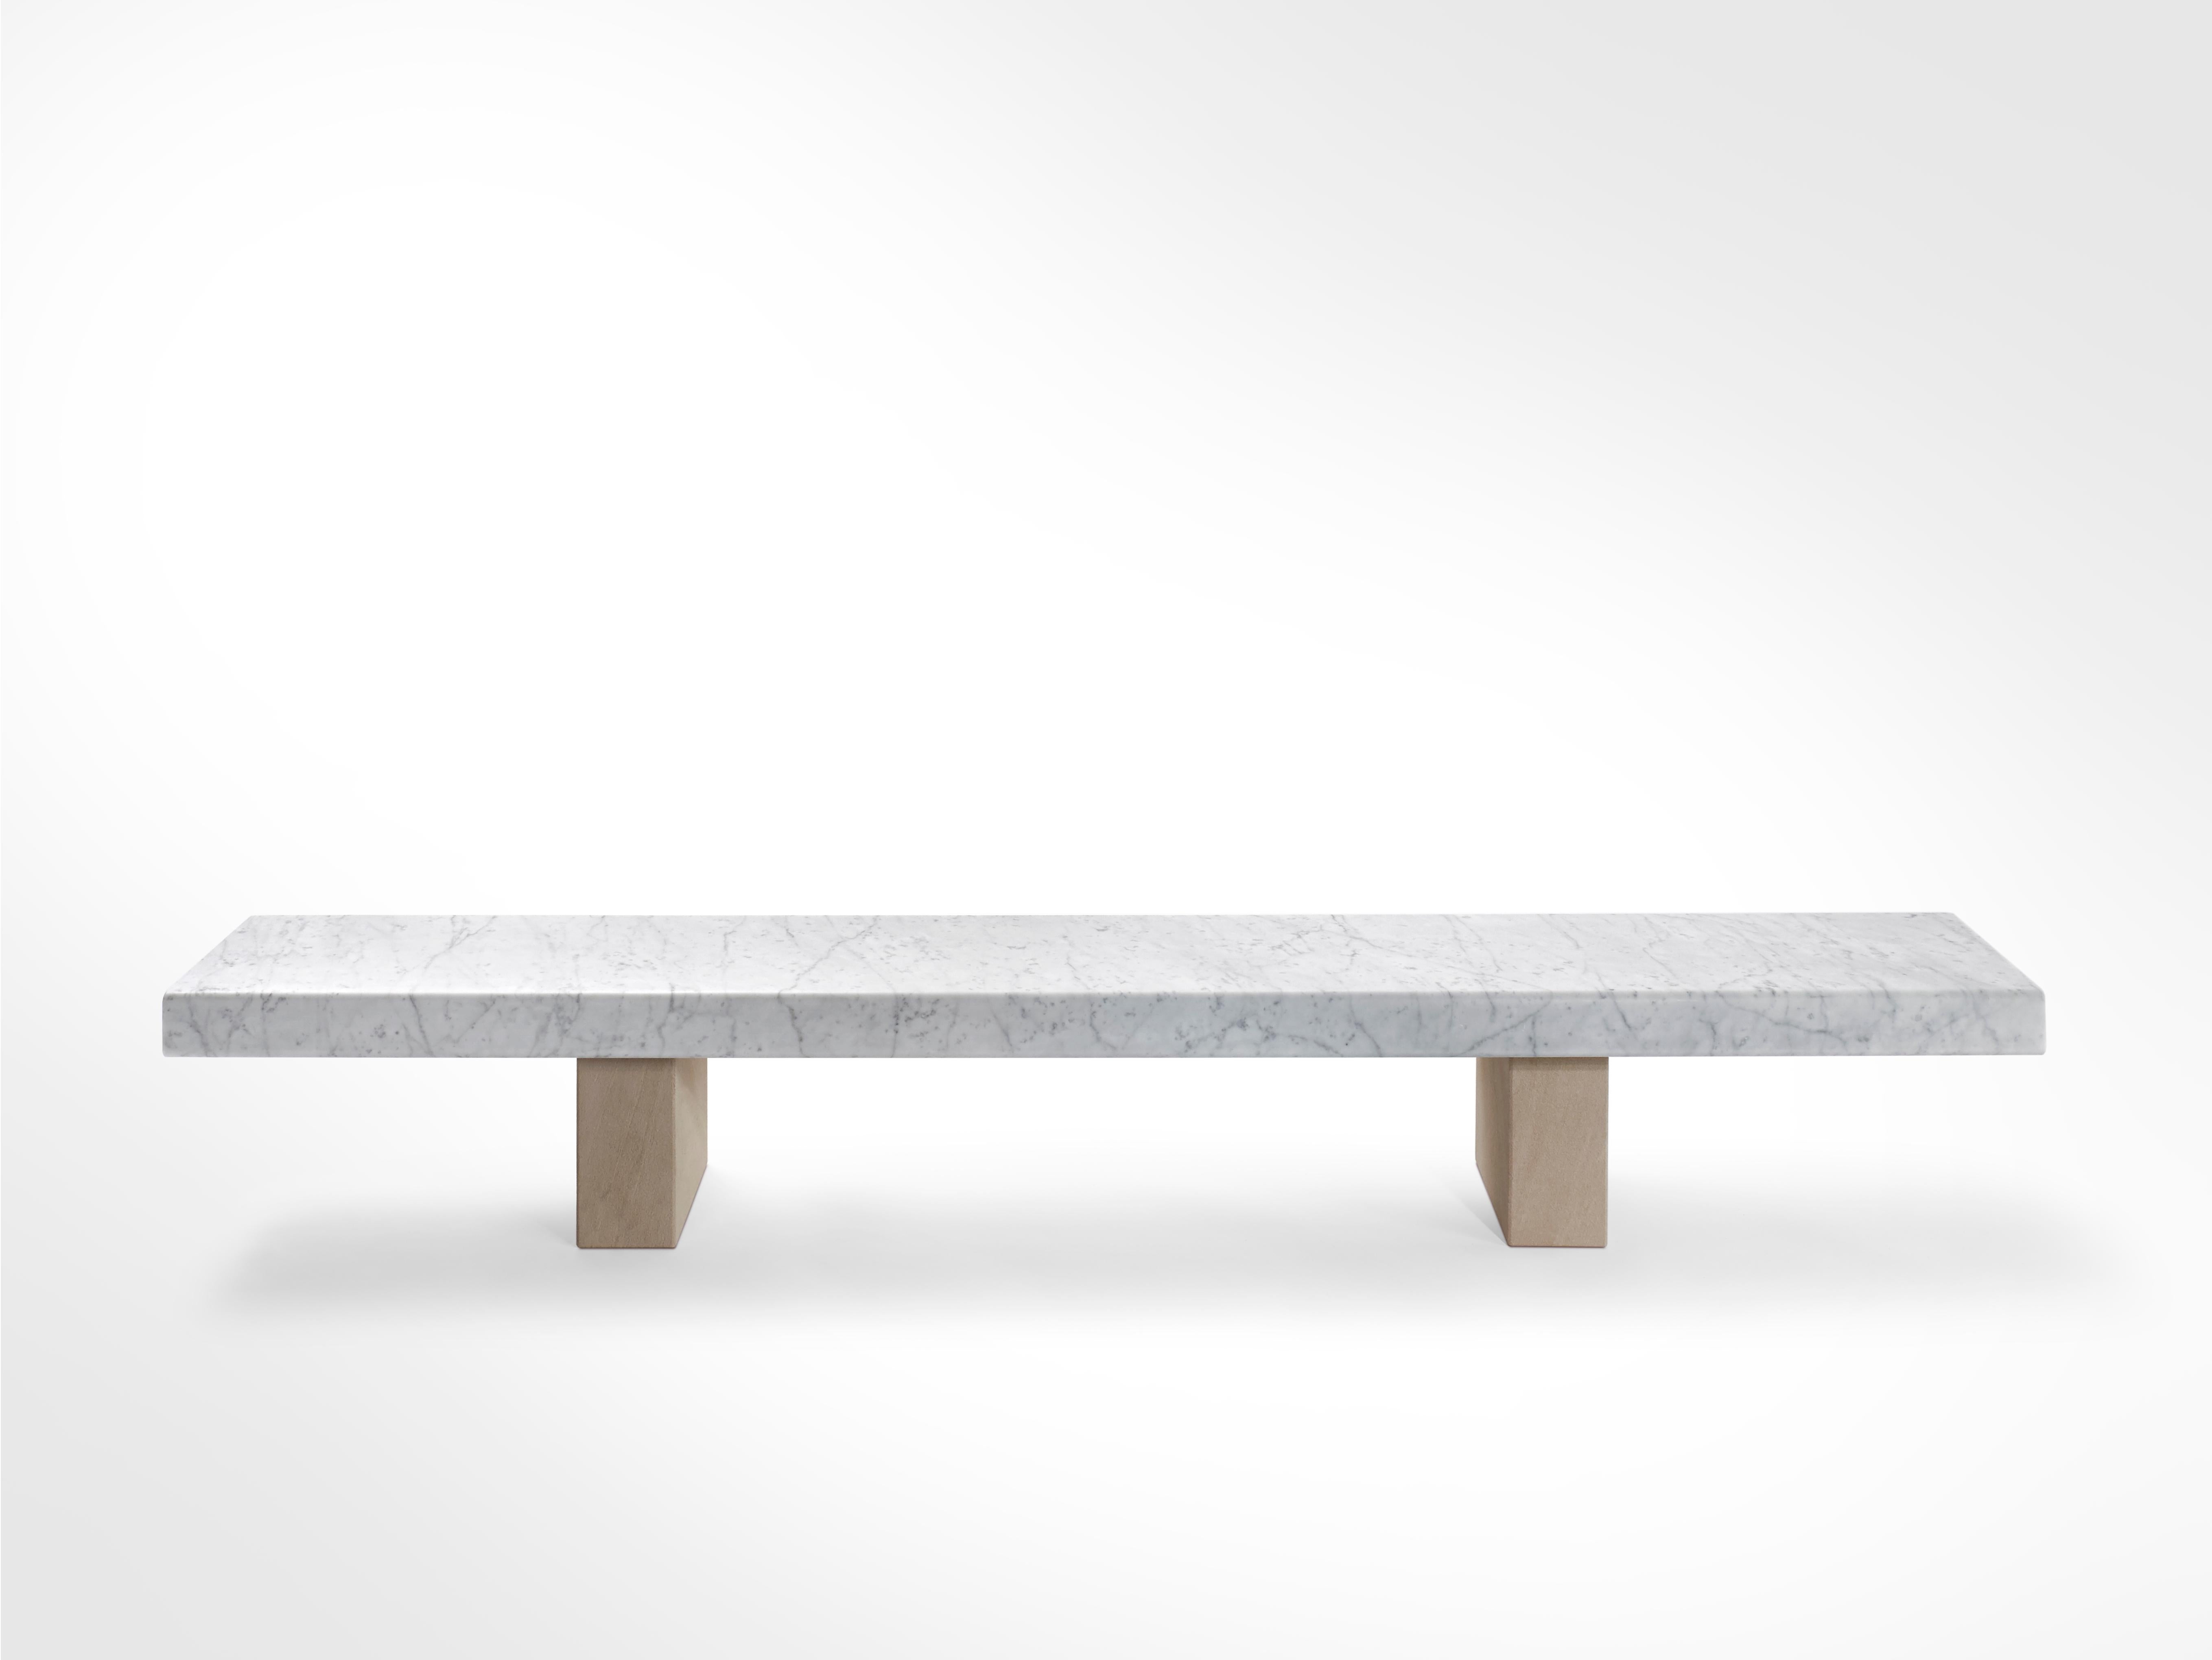 Salvatori Span Outdoor Bench in Bianco Carrara and Avana by John Pawson For Sale